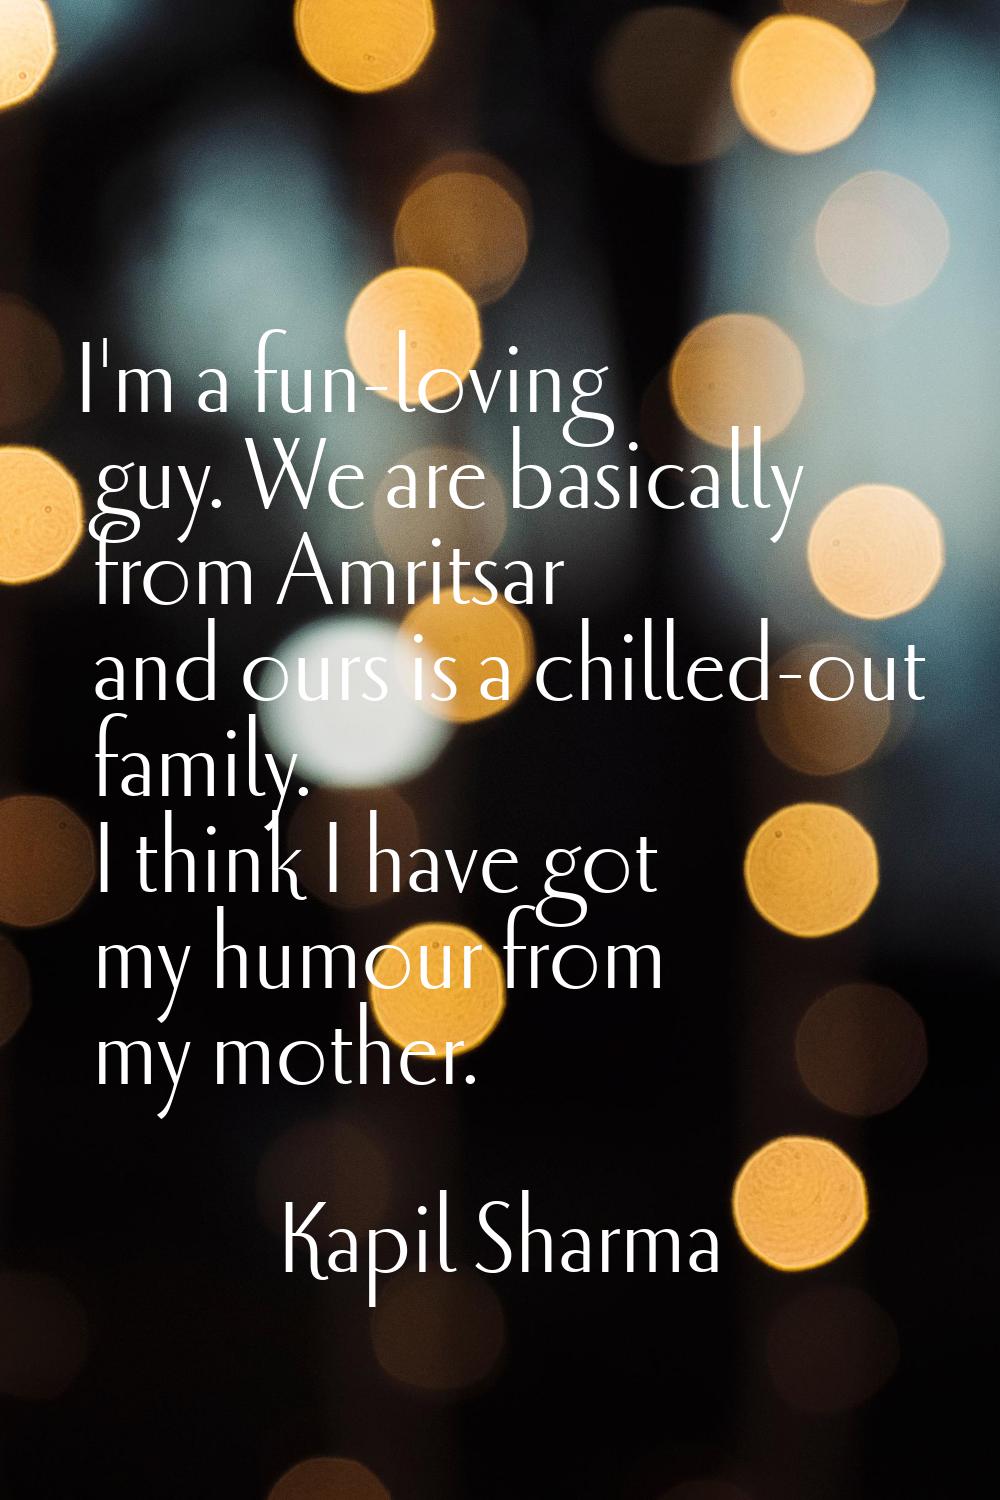 I'm a fun-loving guy. We are basically from Amritsar and ours is a chilled-out family. I think I ha